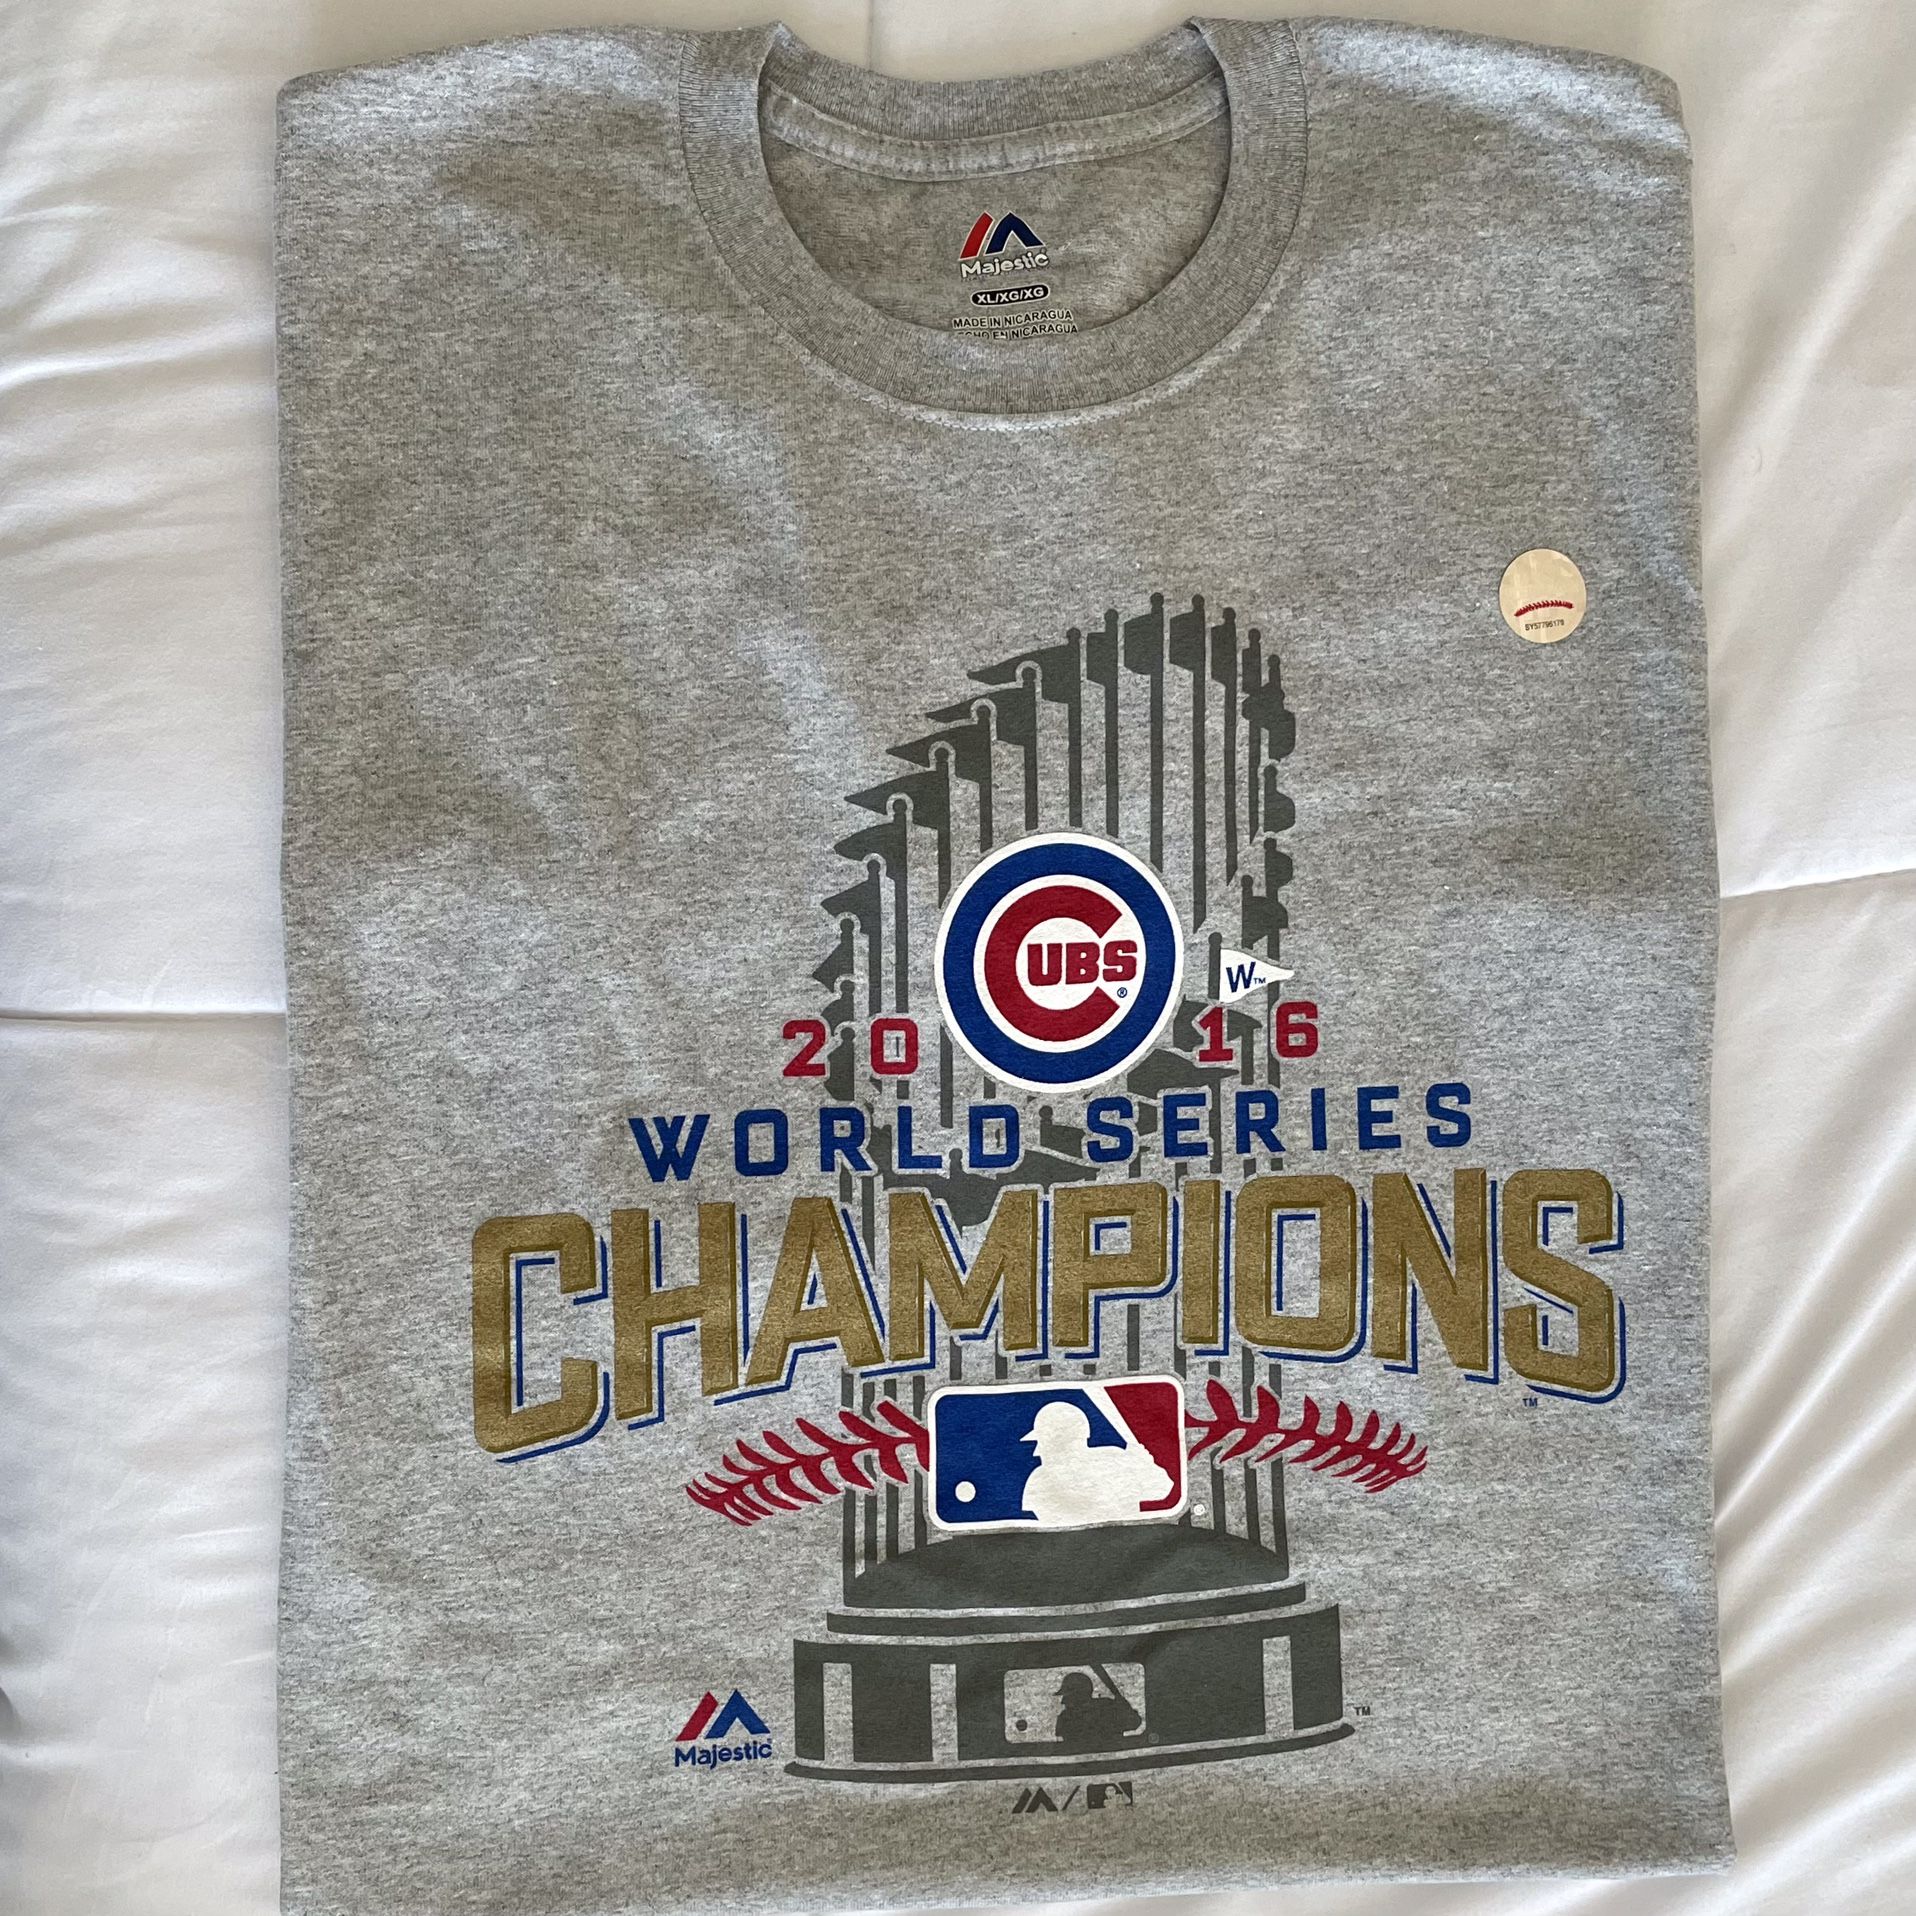 Cubs World Series Champions 2016 ⚾️ T-shirt Mens Size XL /New, all labeling attached. Fits Women, Too!